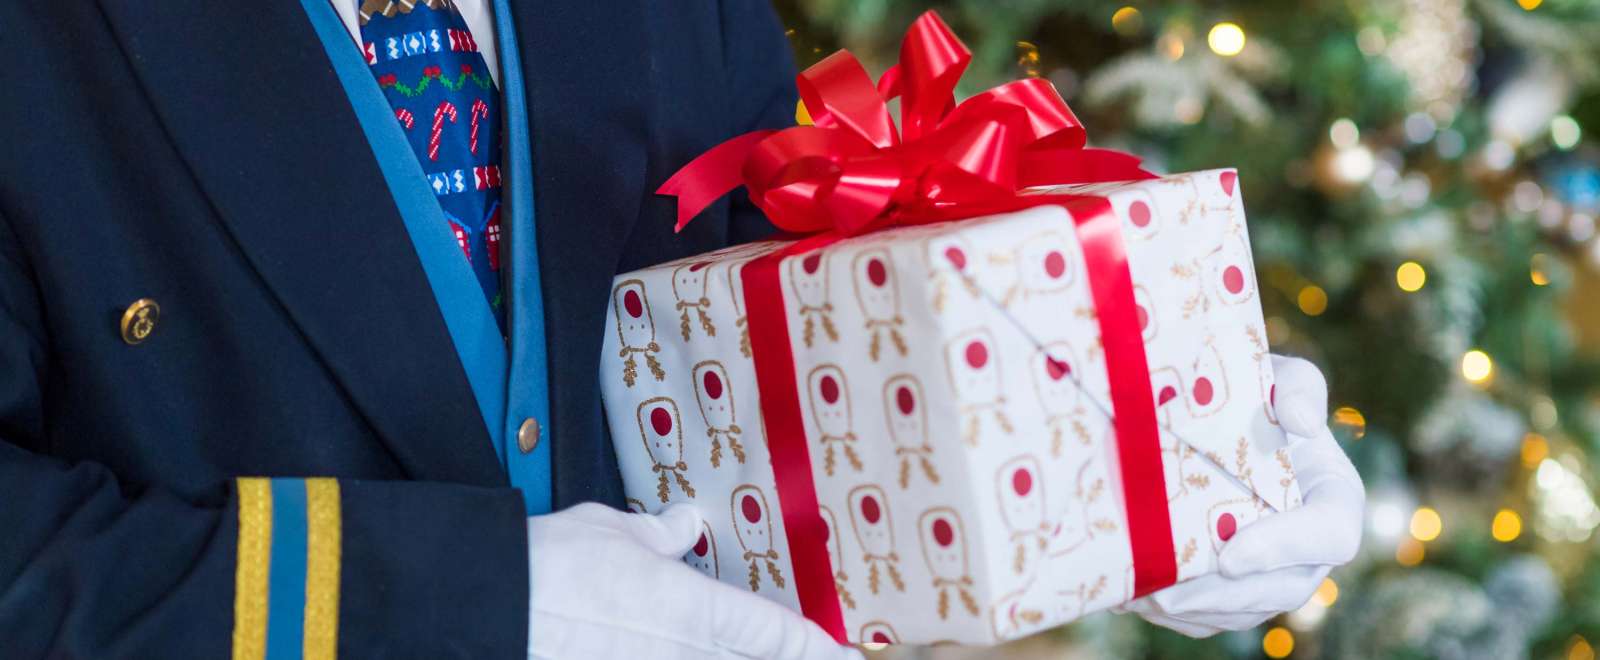 Royal Duchy Hotel Doorman with Festive Tie Holding Christmas Present